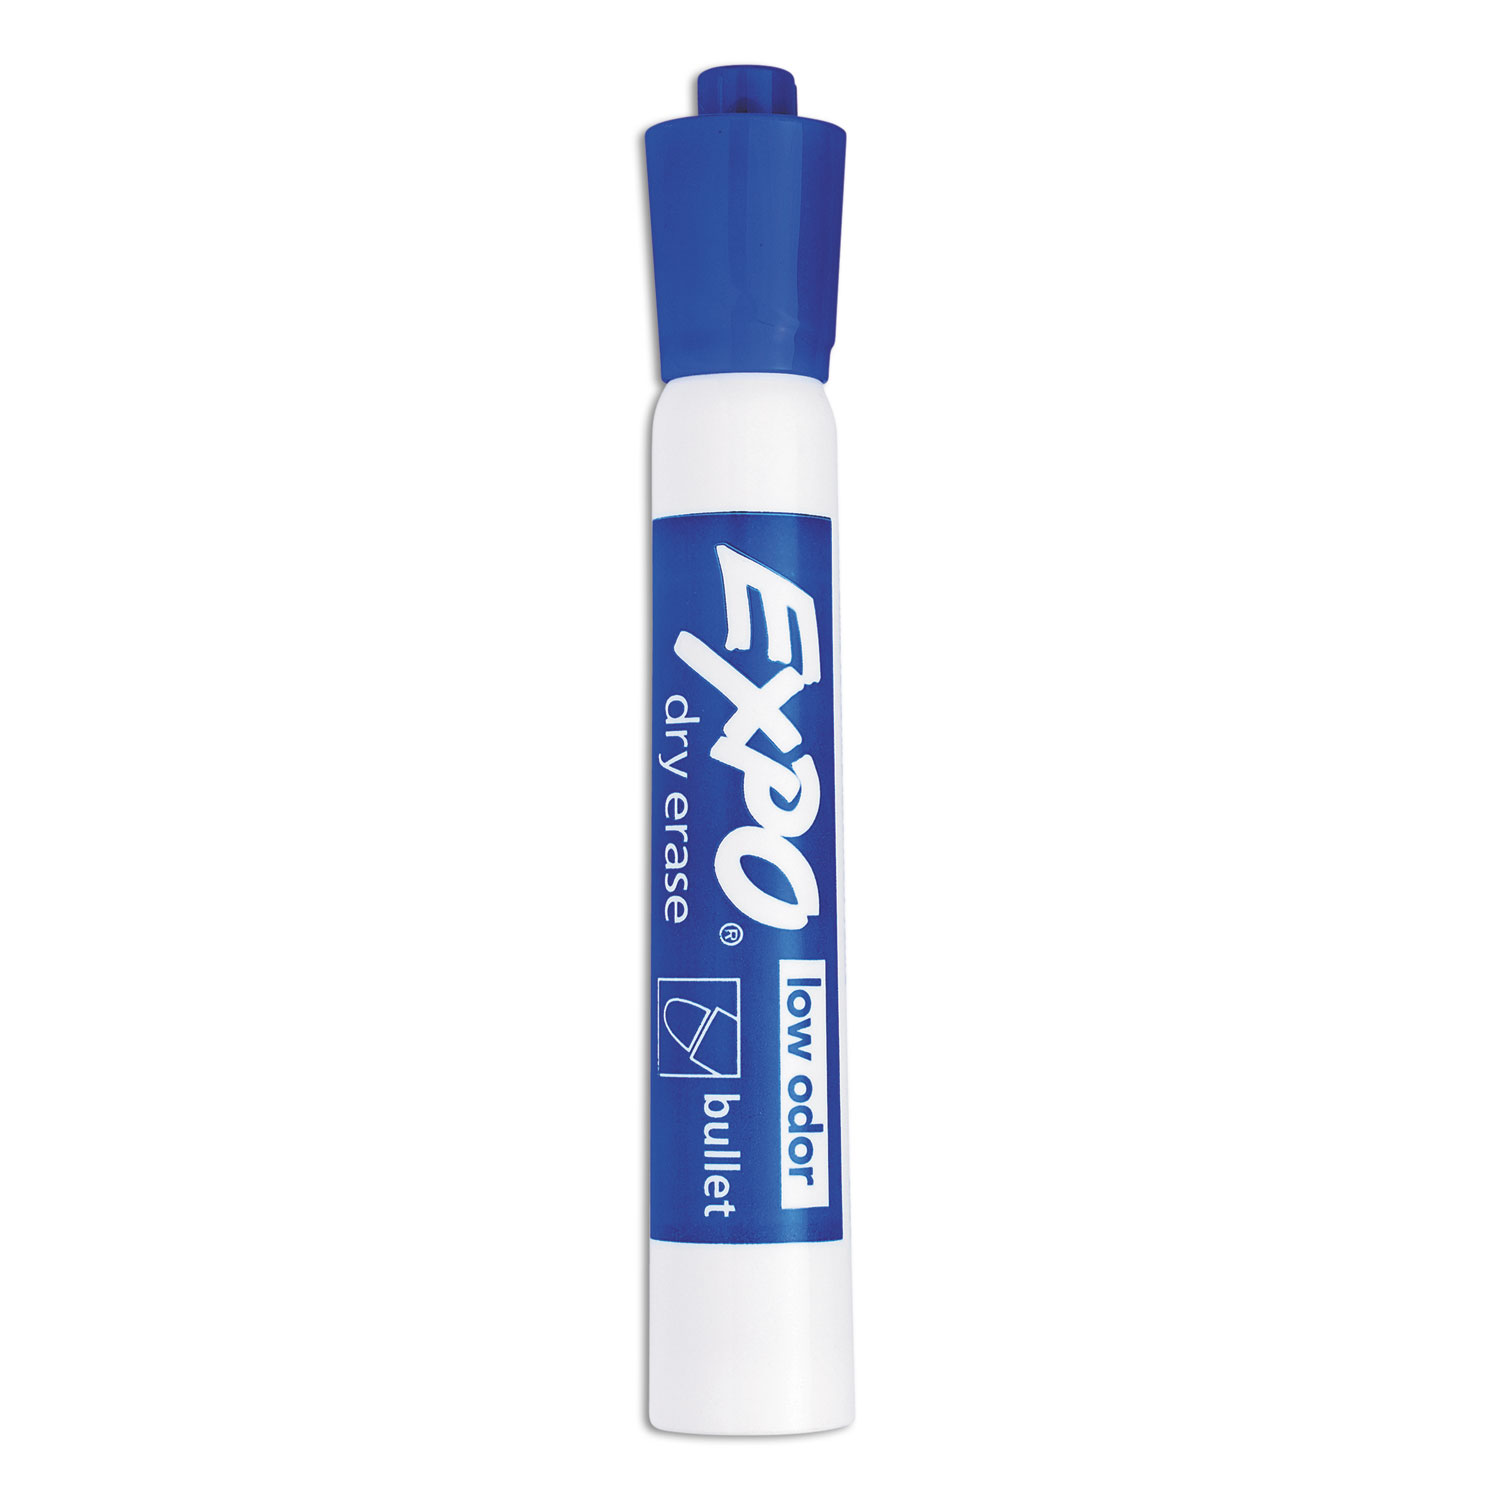 Expo Low Odor Dry Erase Markers, Ultra Fine Tip - Office Pack, Black, 36-Pack